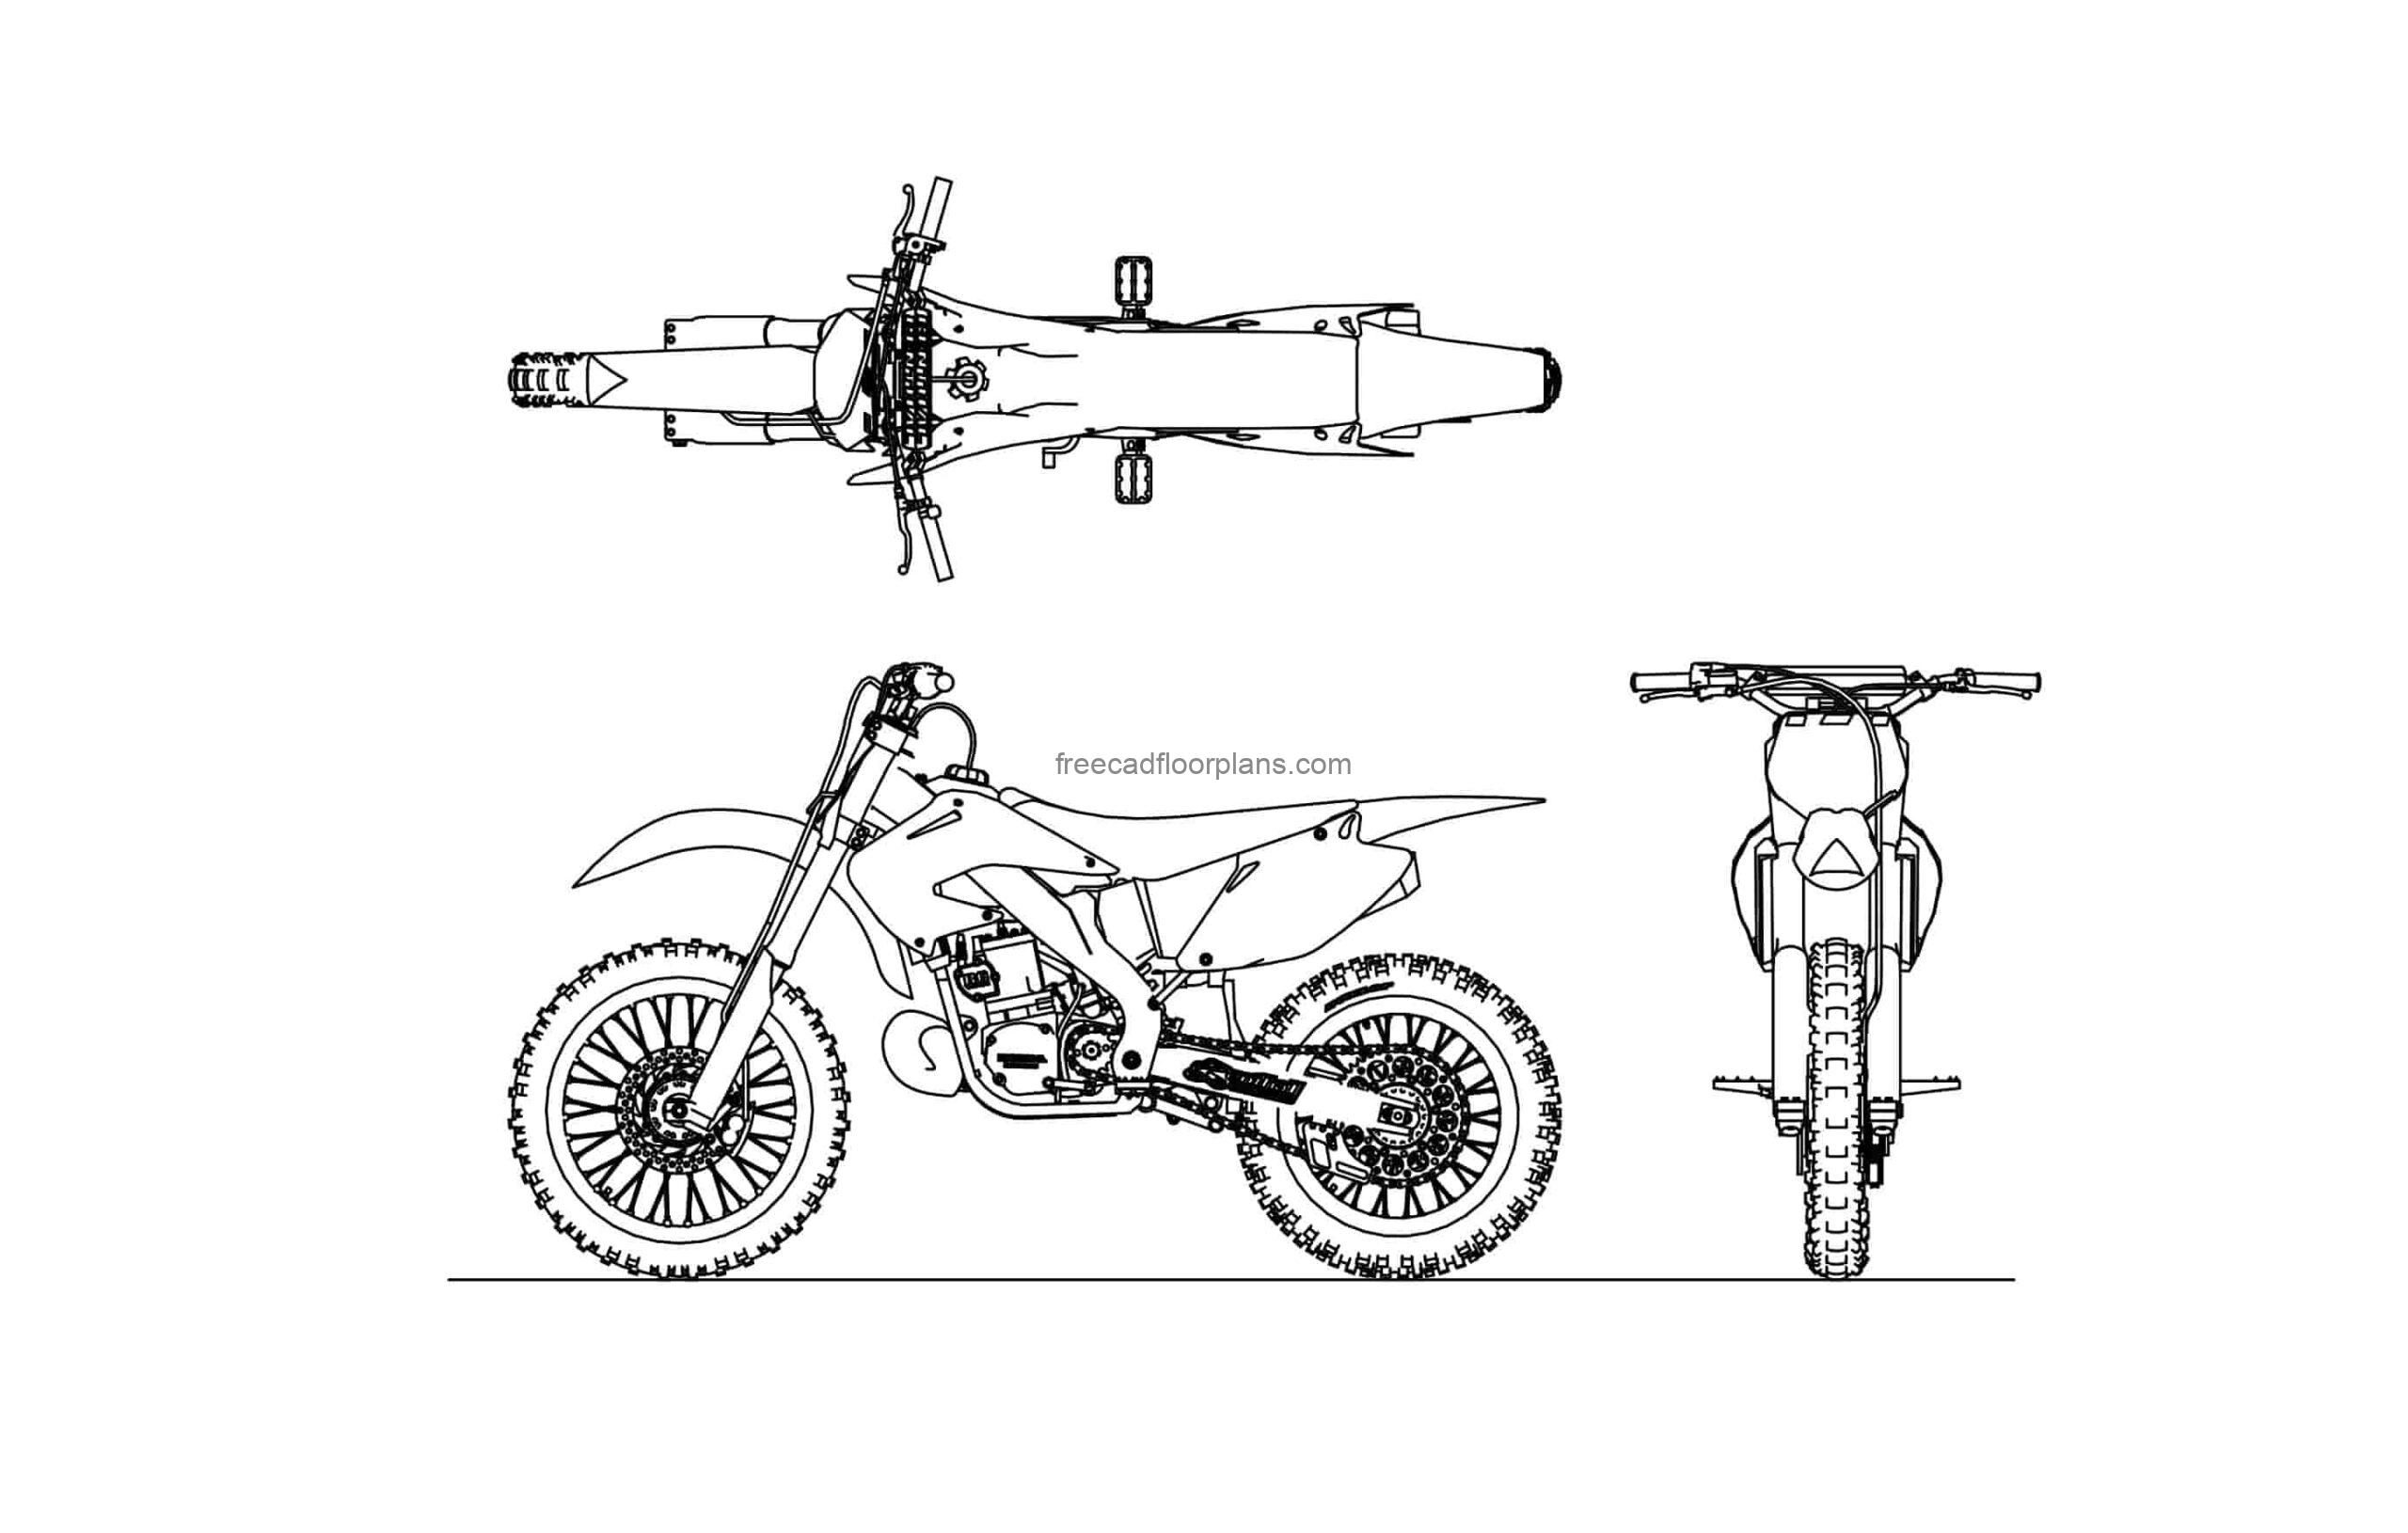 motocross dirtbike cad model drawing plan and elevations model cad block for free download